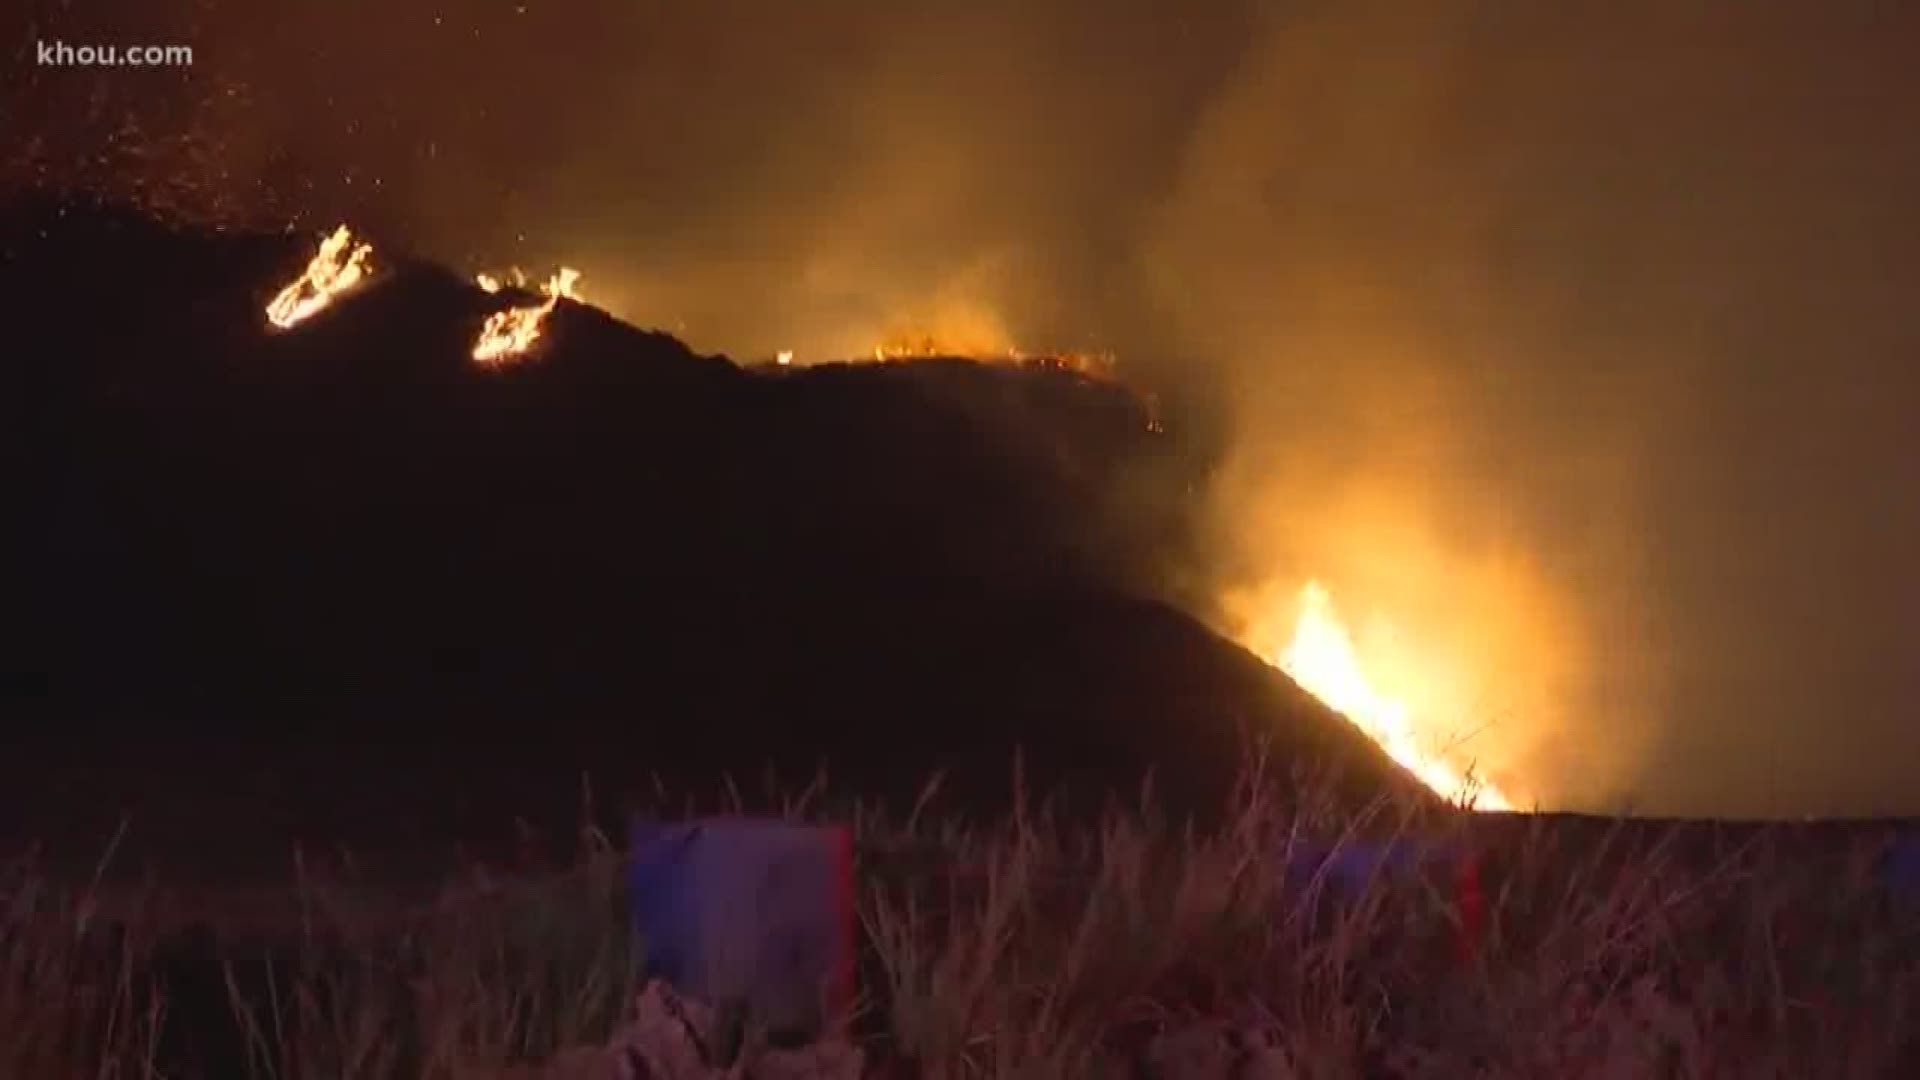 Firefighters battled a mulch fire for several hours overnight in east Houston.